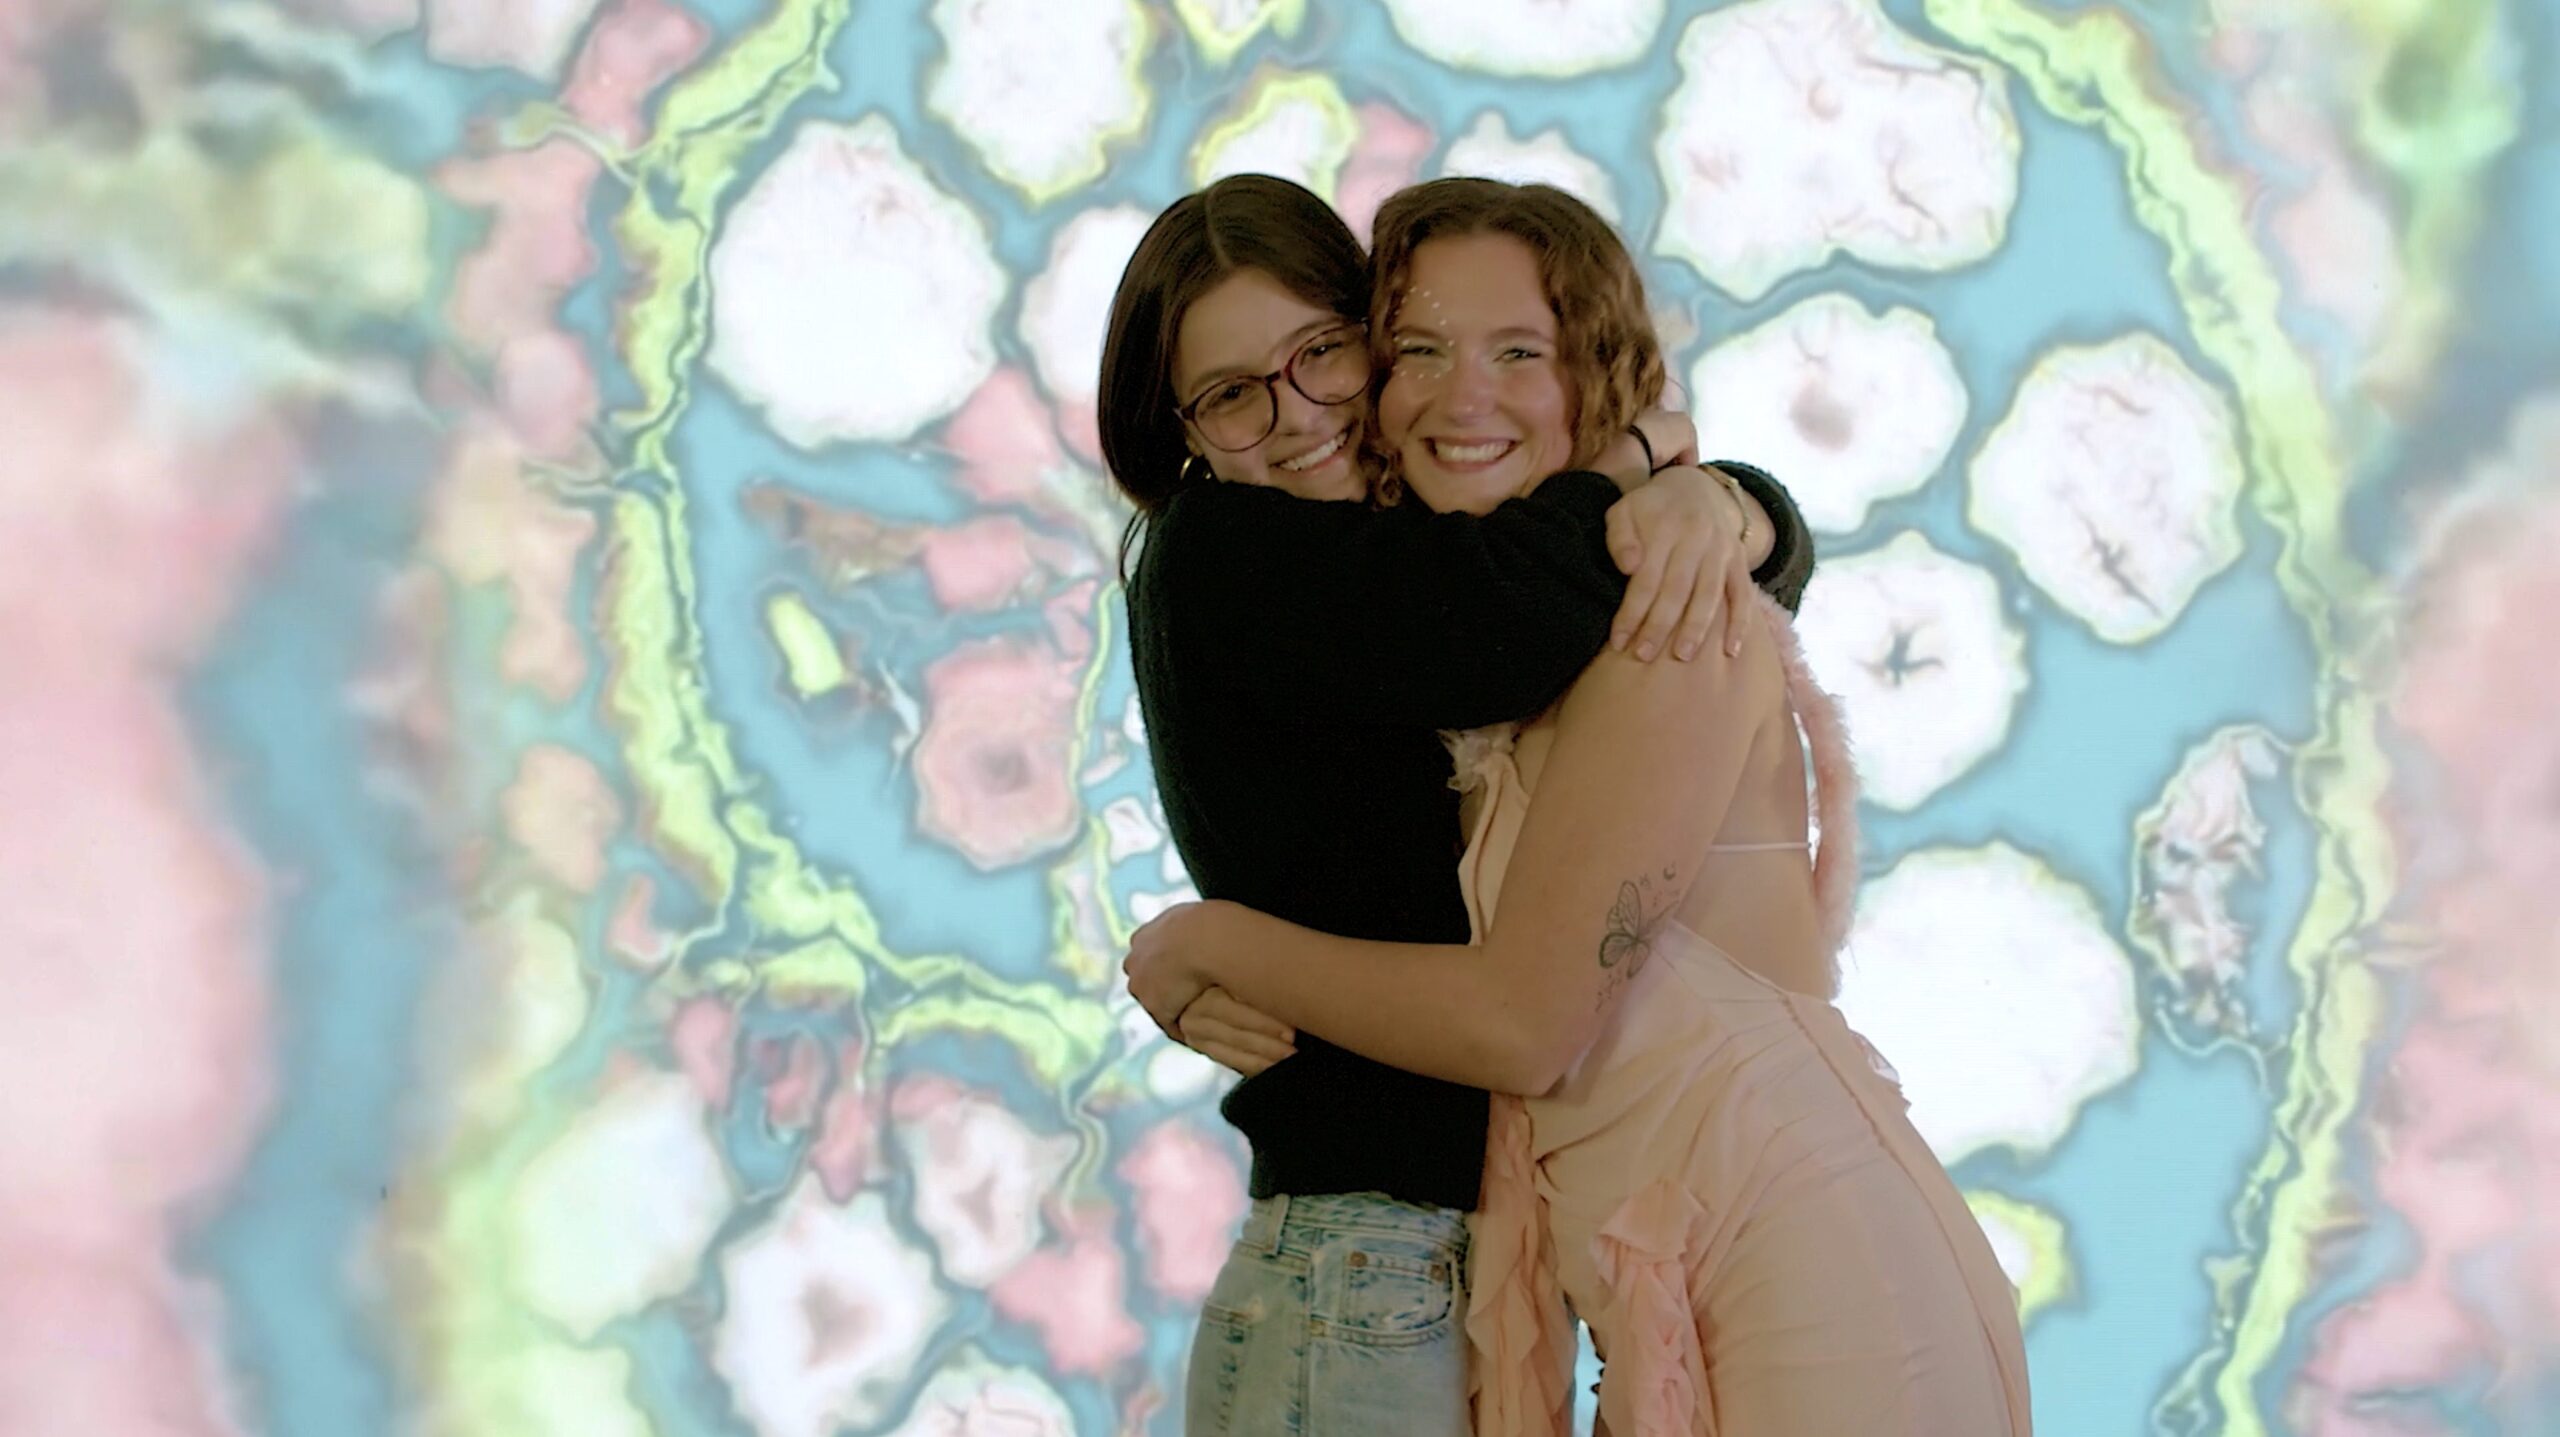 Melis and Model hugging in front of a spiraled background